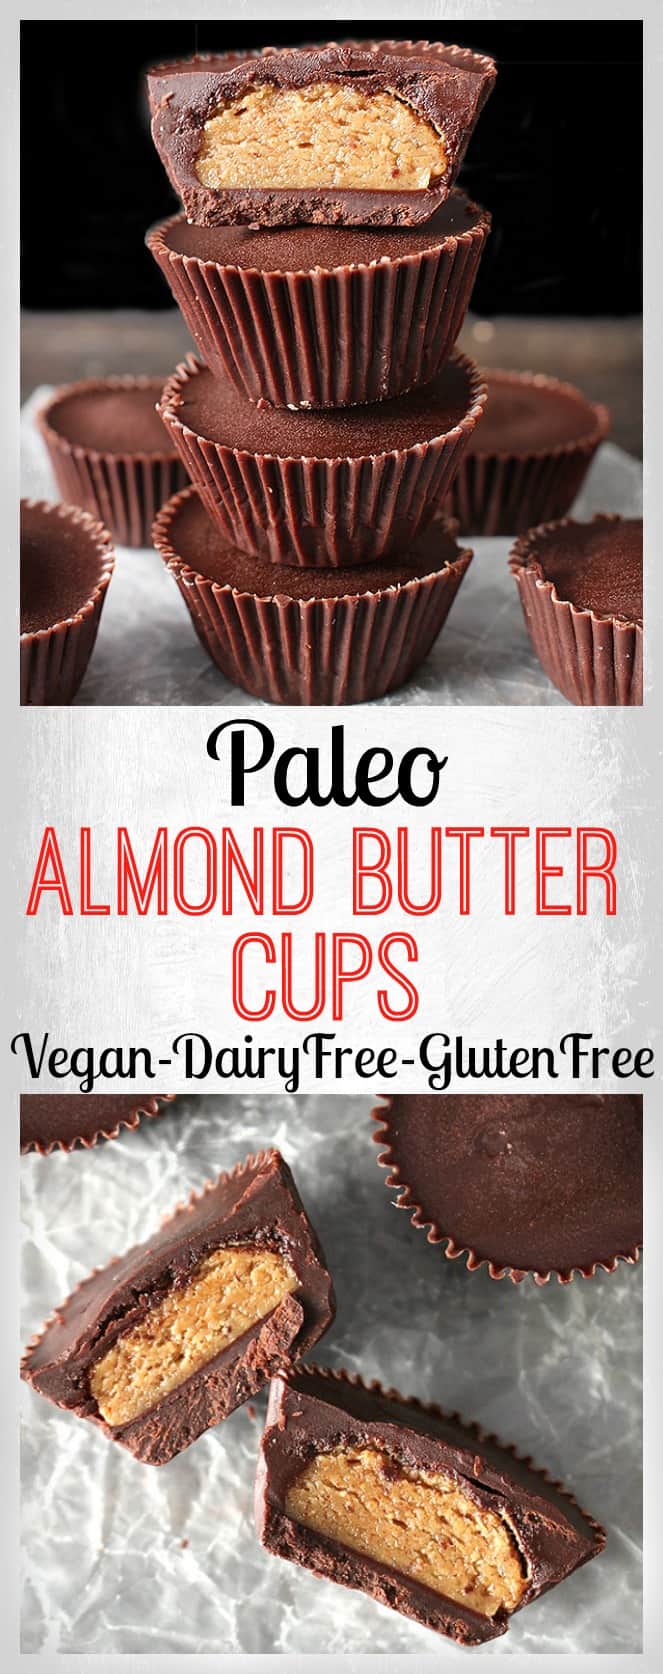 Paleo Almond Butter Cups 